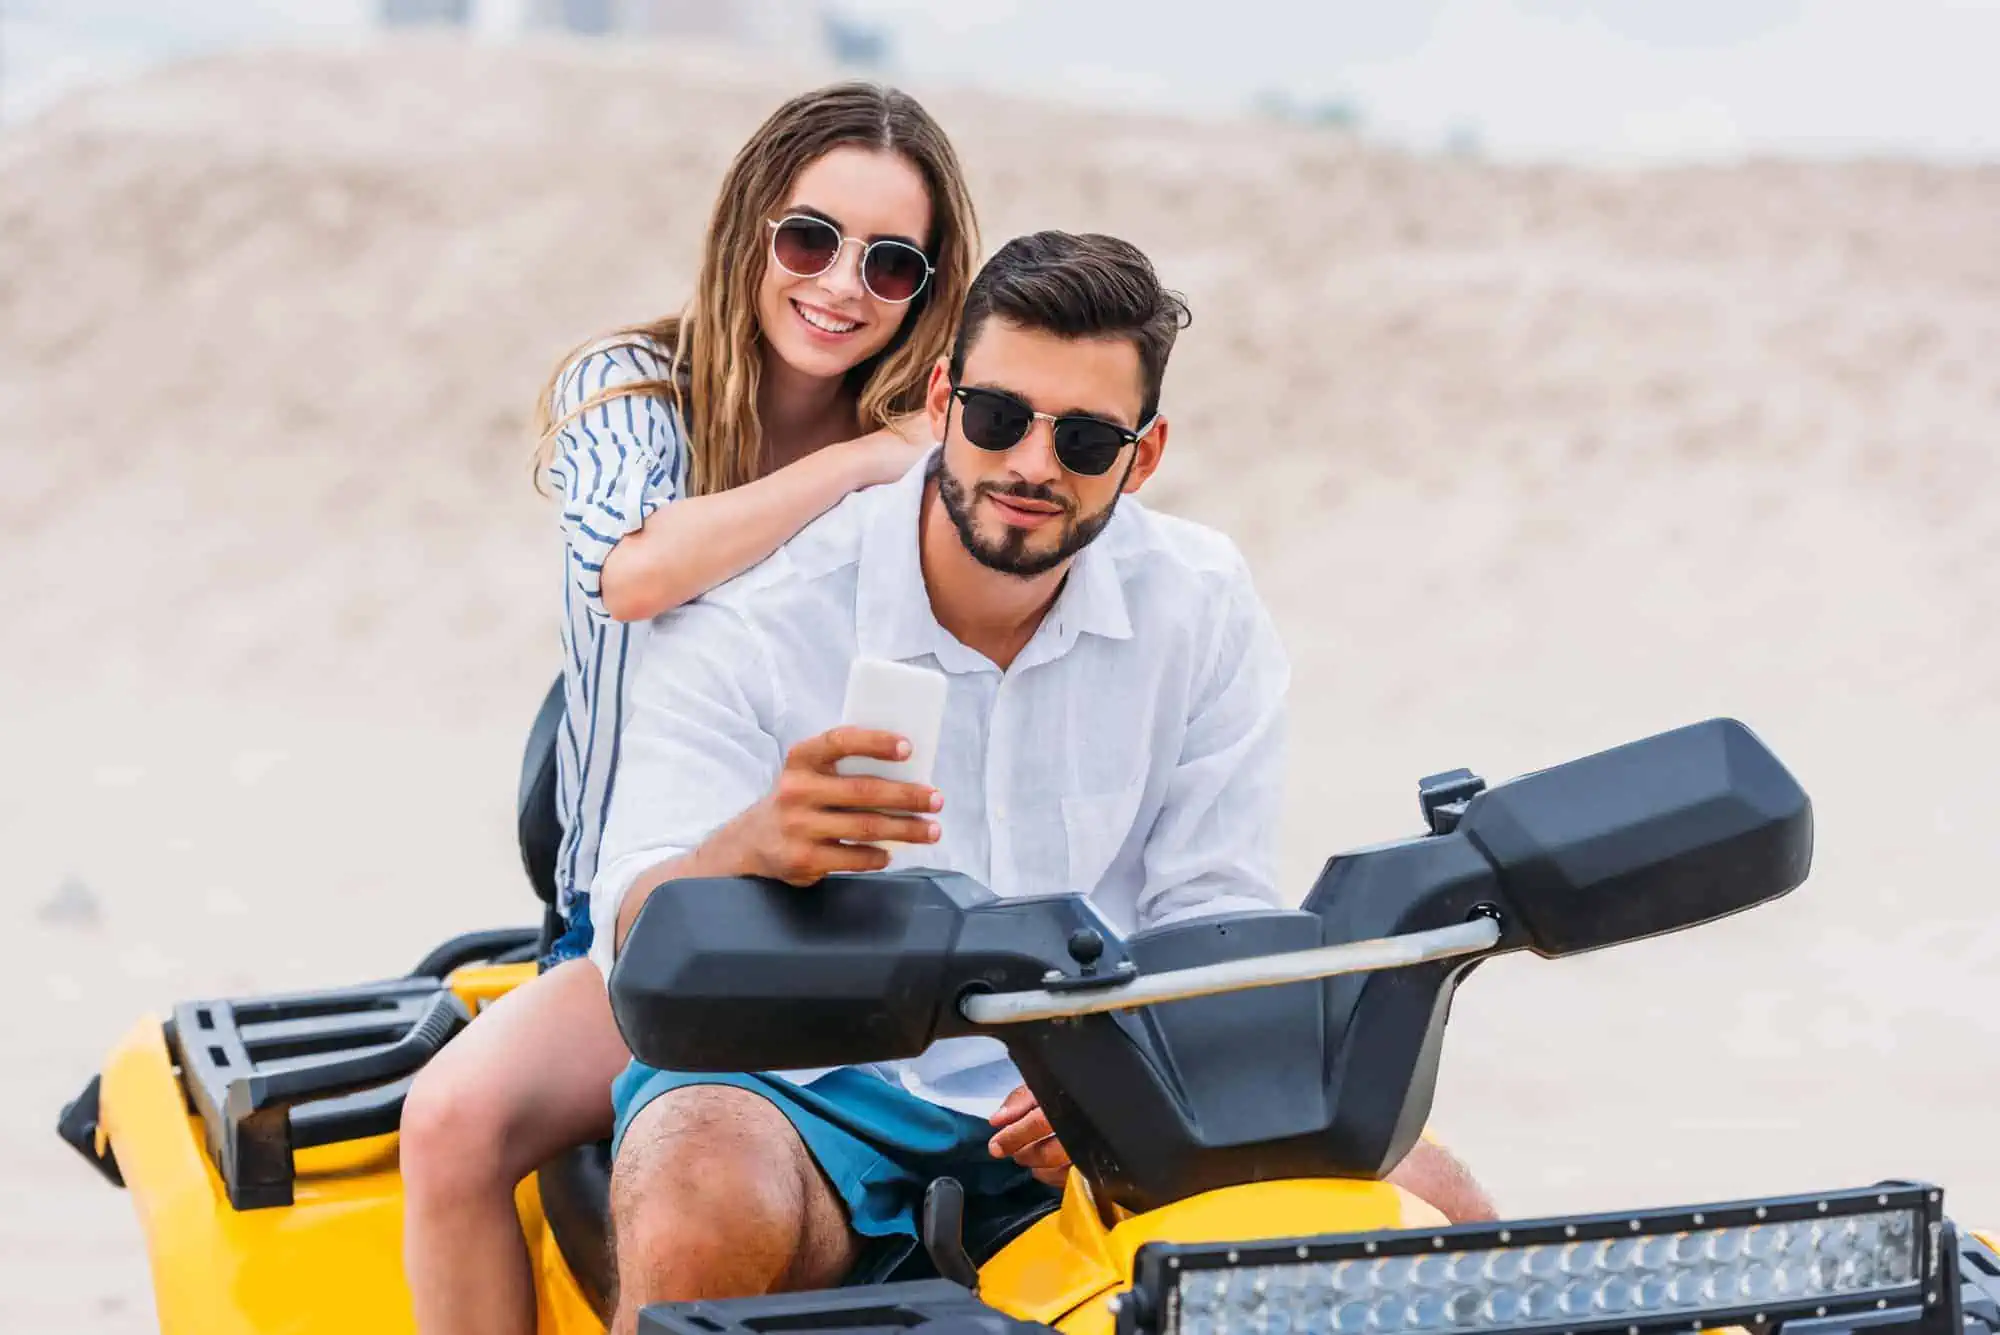 A man and a woman on a yellow atv